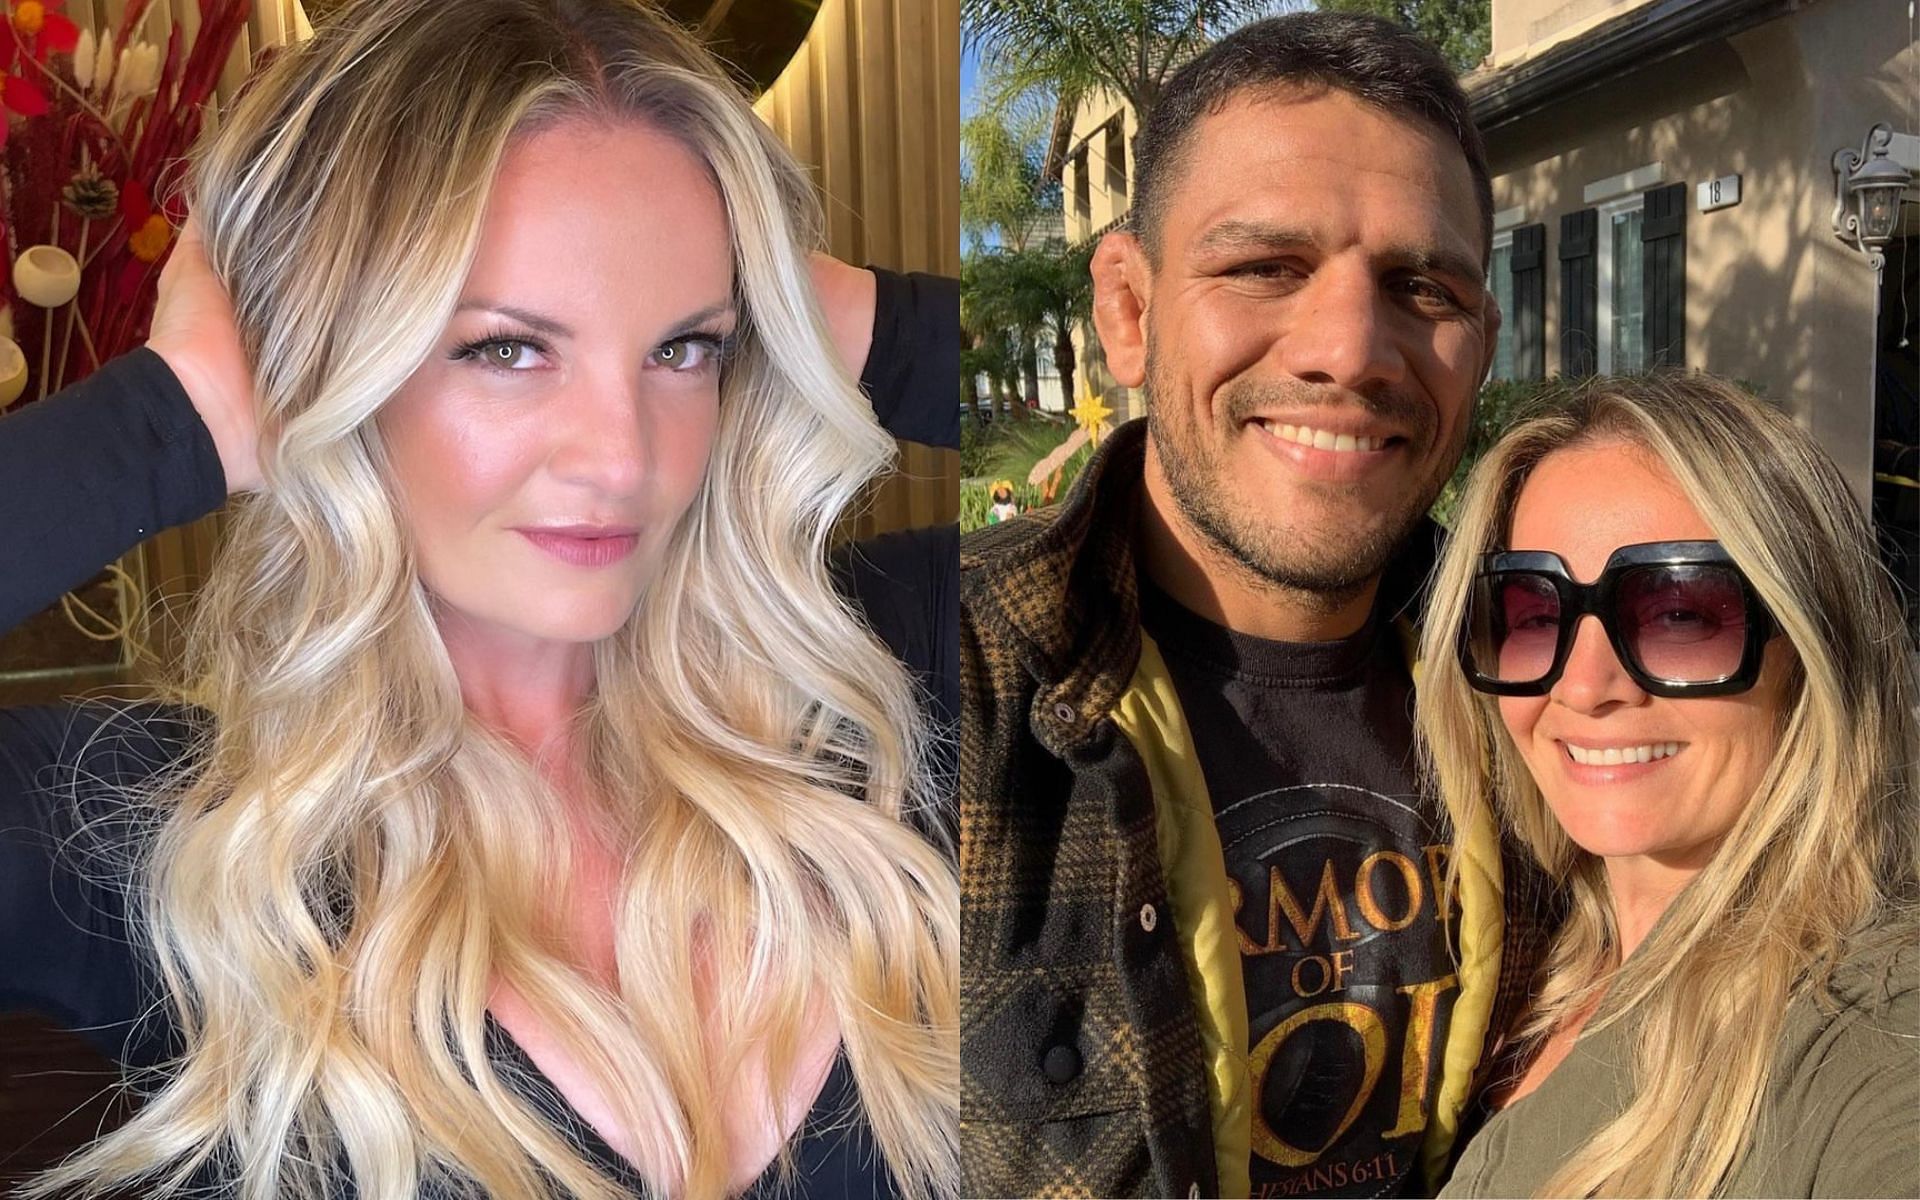 Cristiane dos Anjos (left and far right) is married to Rafael dos Anjos (second from right) [Images courtesy: @rdosanjosmma on Instagram] 